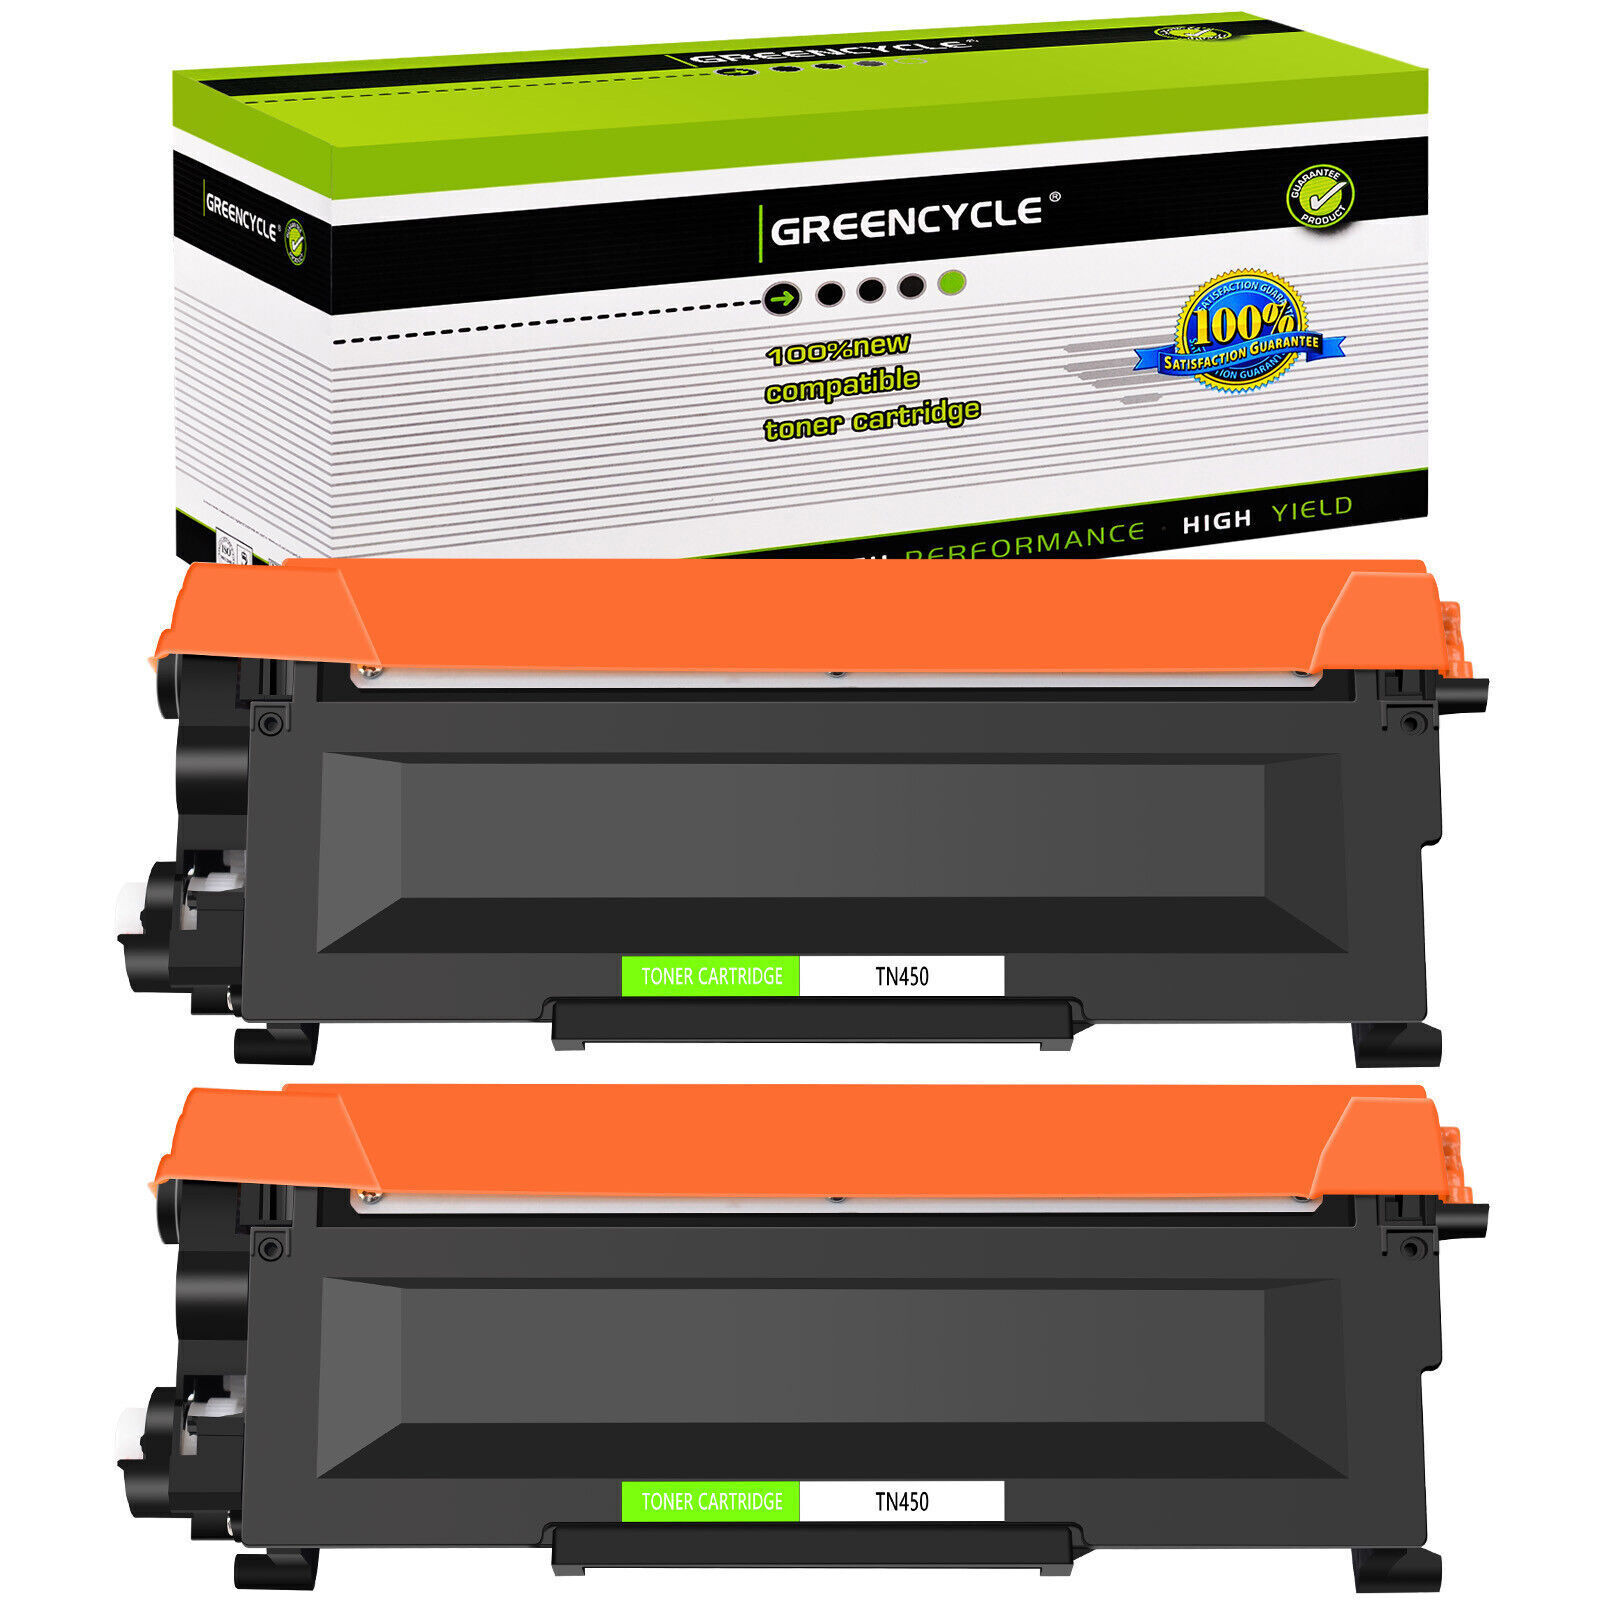 2PK Greencycle black Compatible Toner Cartridge for Brother TN450 TN420 MFC-7360